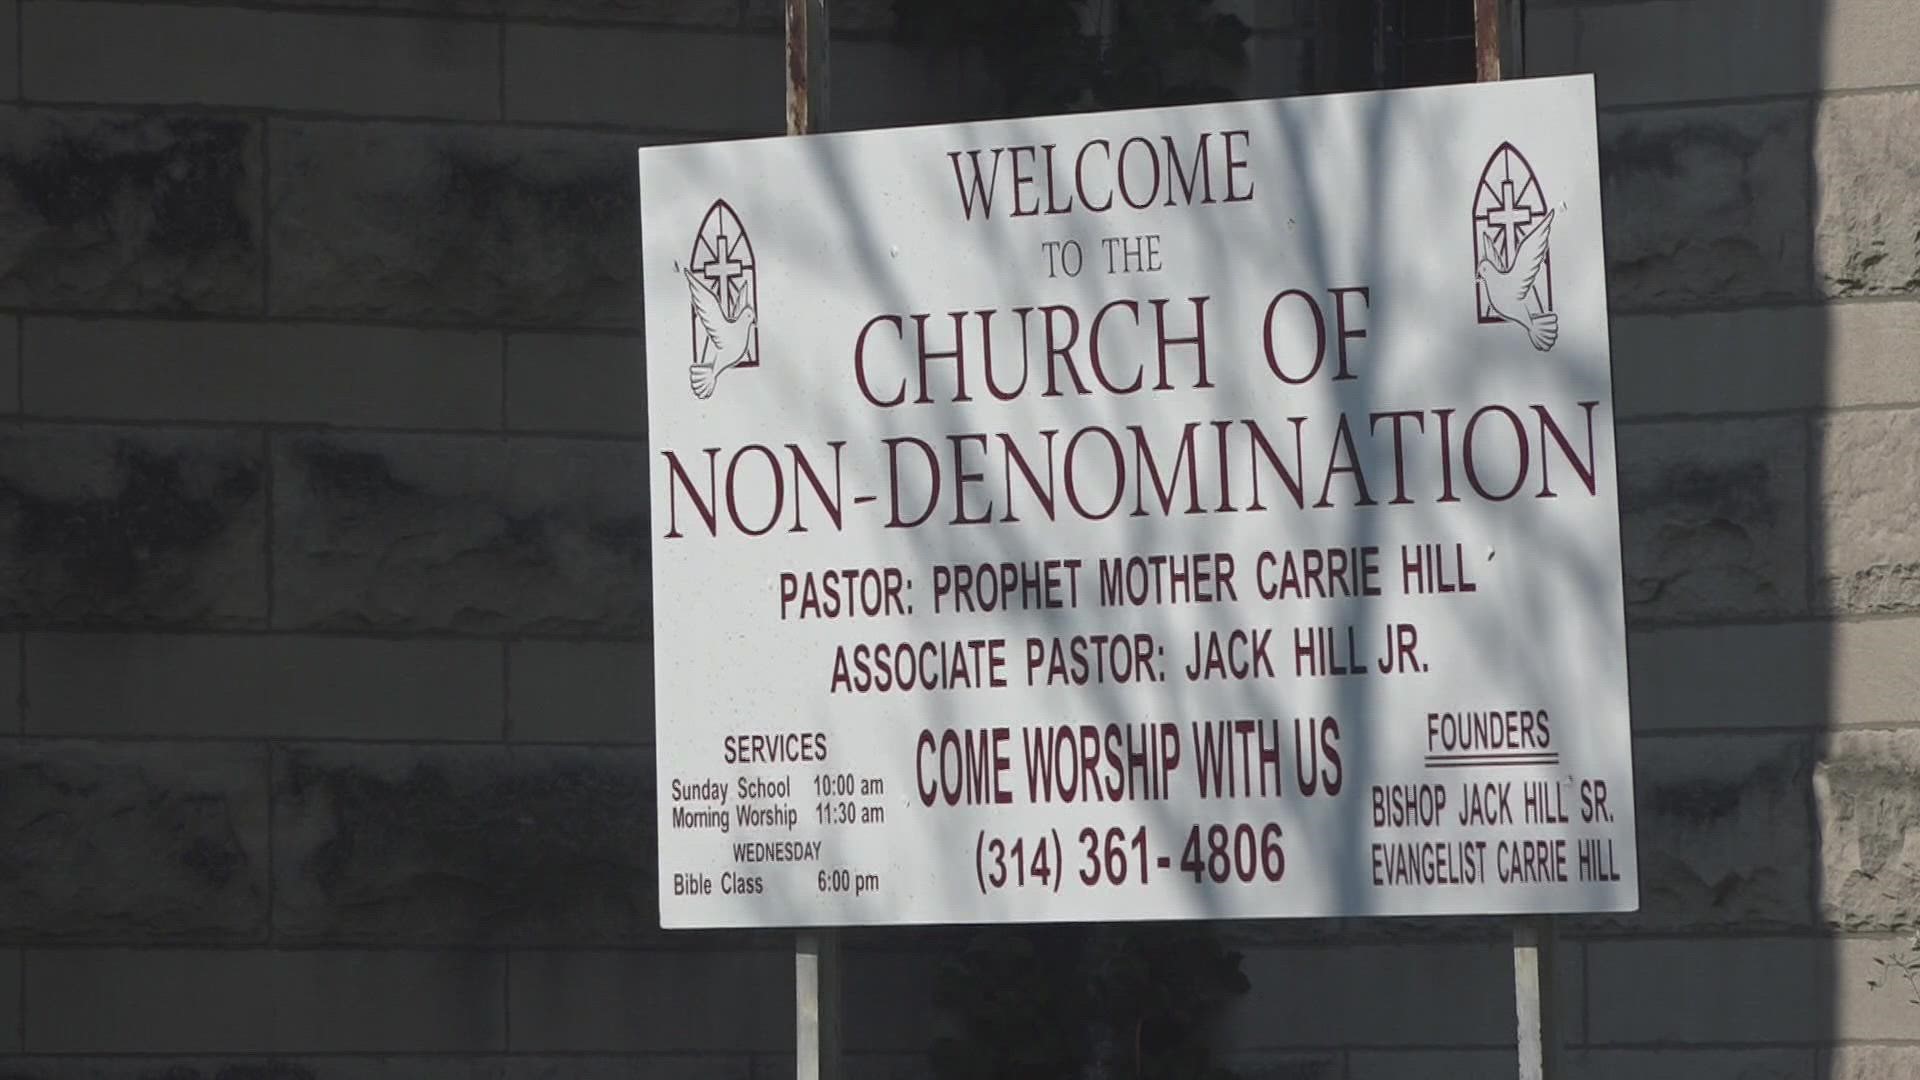 Officials with the Church of Non-Denomination have held services online since vandals struck last month.
The incident happened a couple of weeks ago.